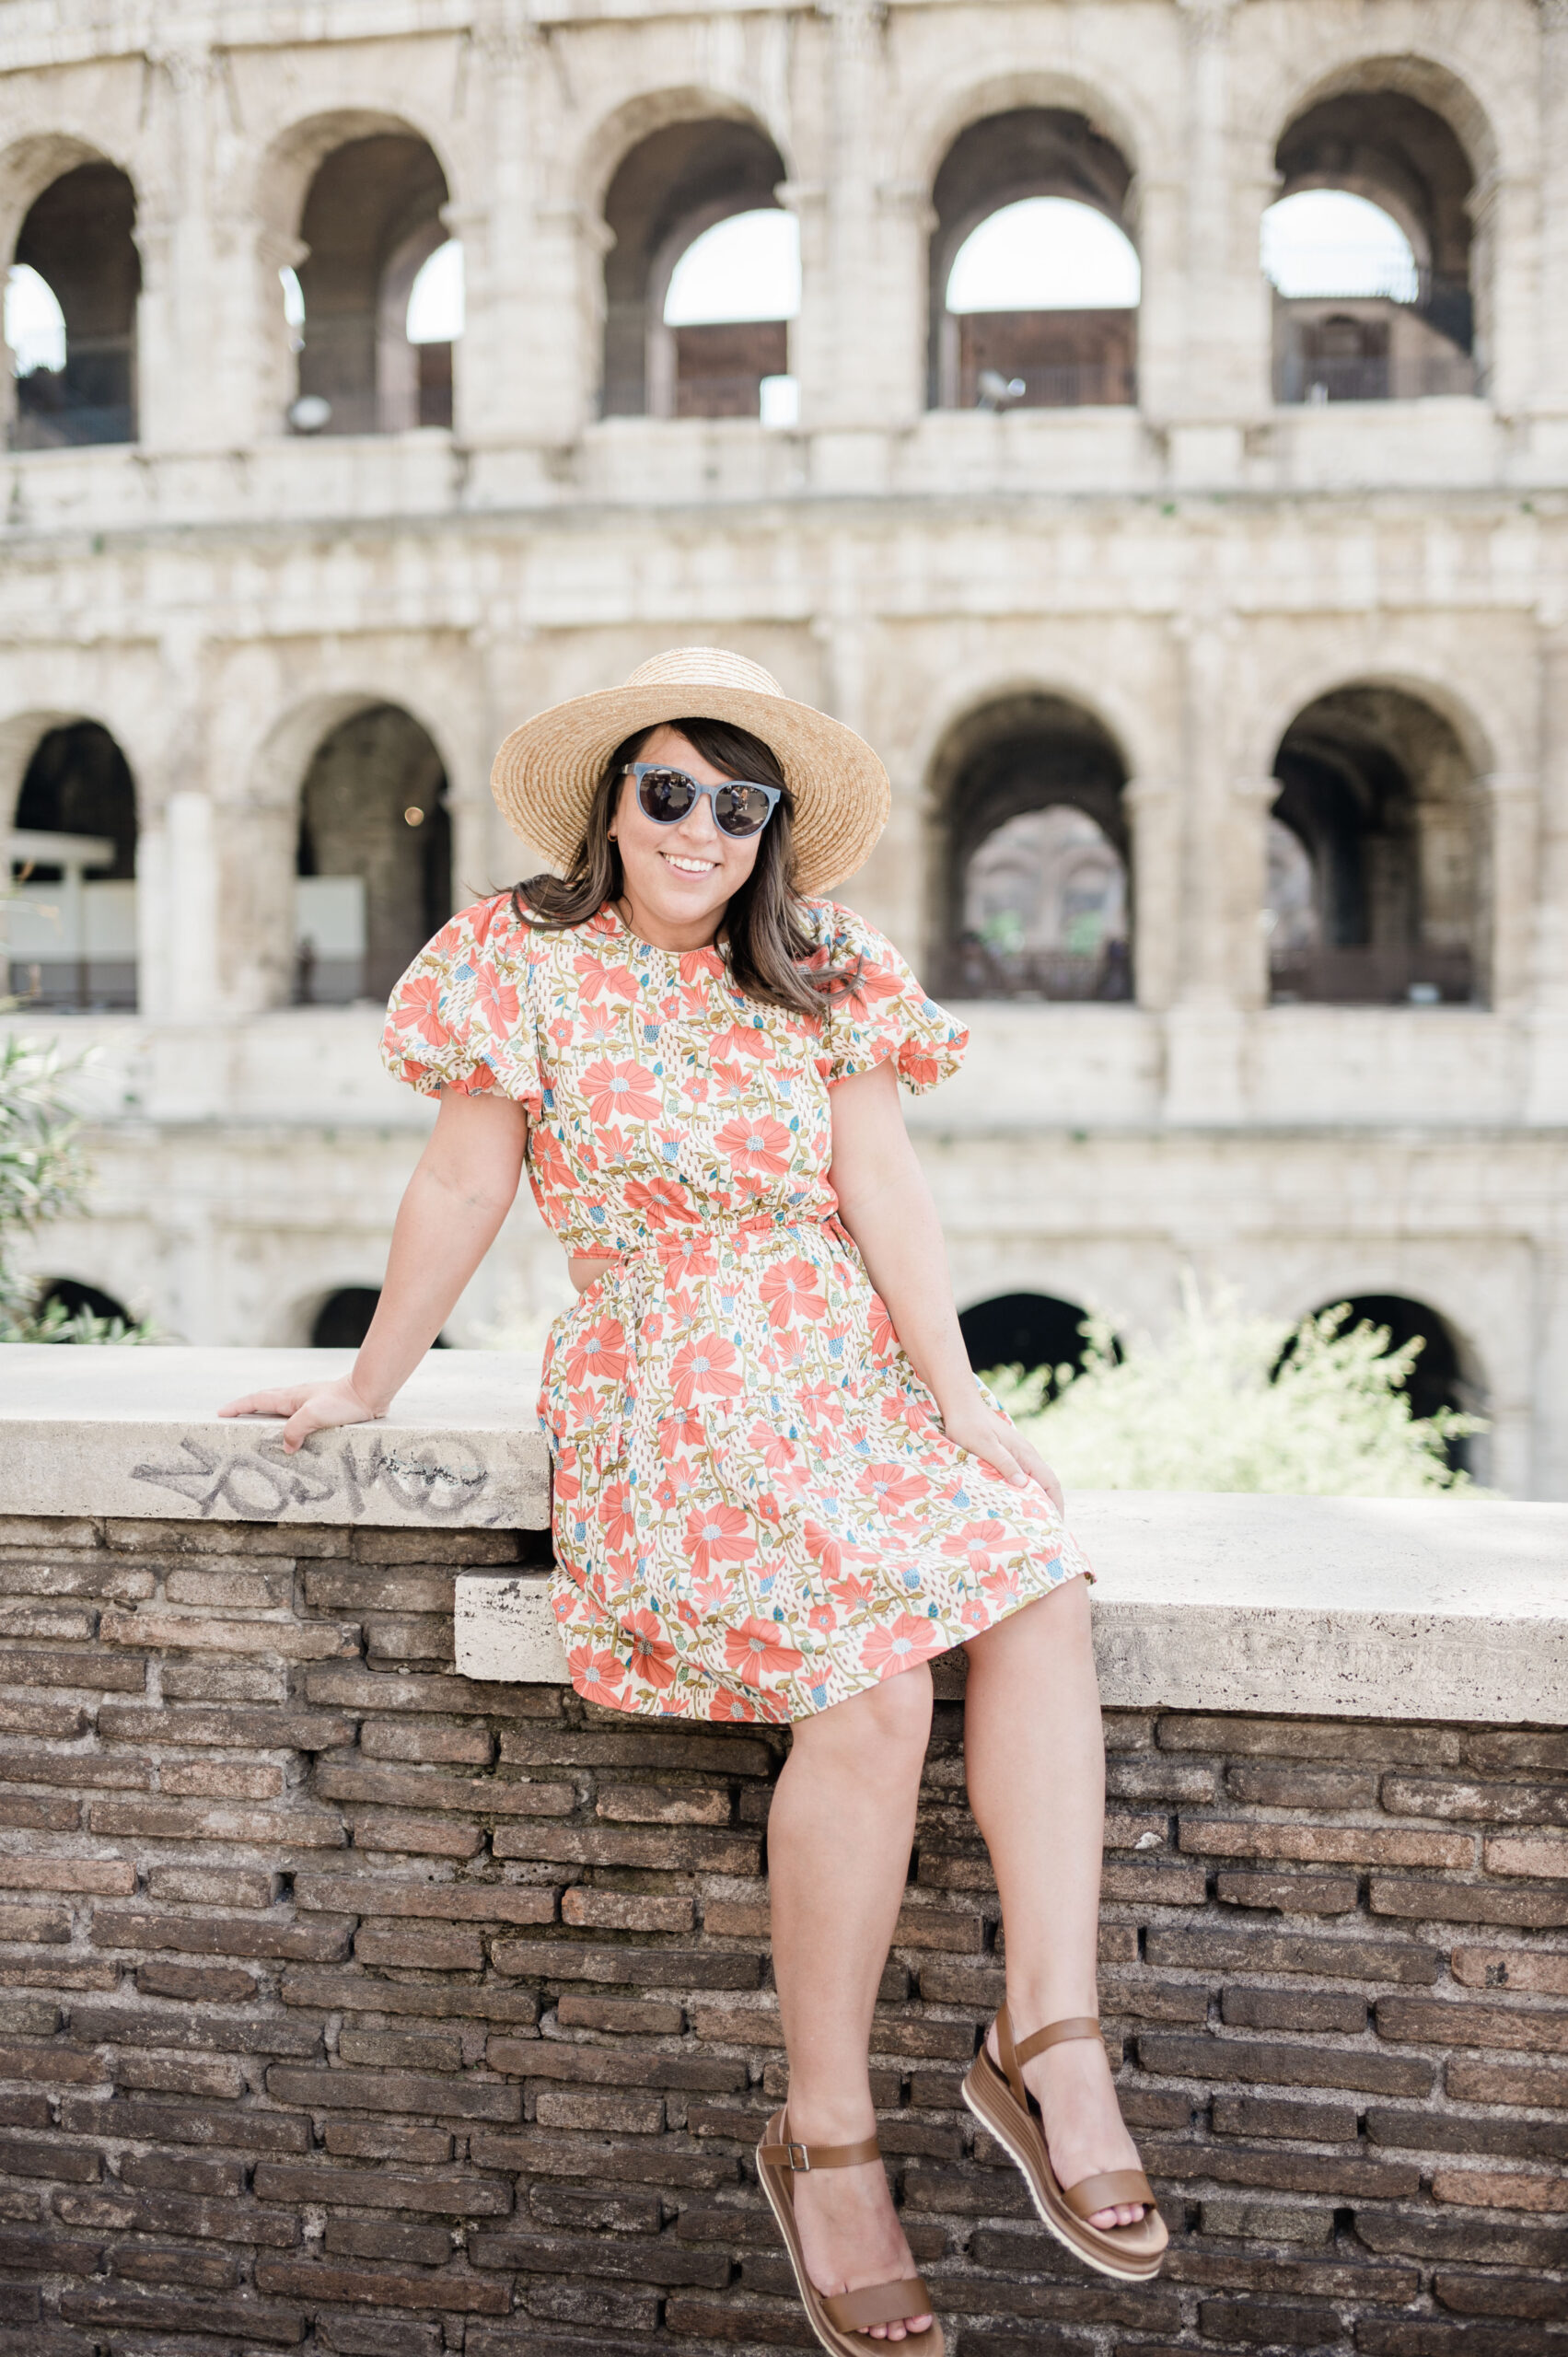 Brittney Naylor wearing red floral dress sitting on wall with the Colosseum behind her. 36 Hours in Rome.